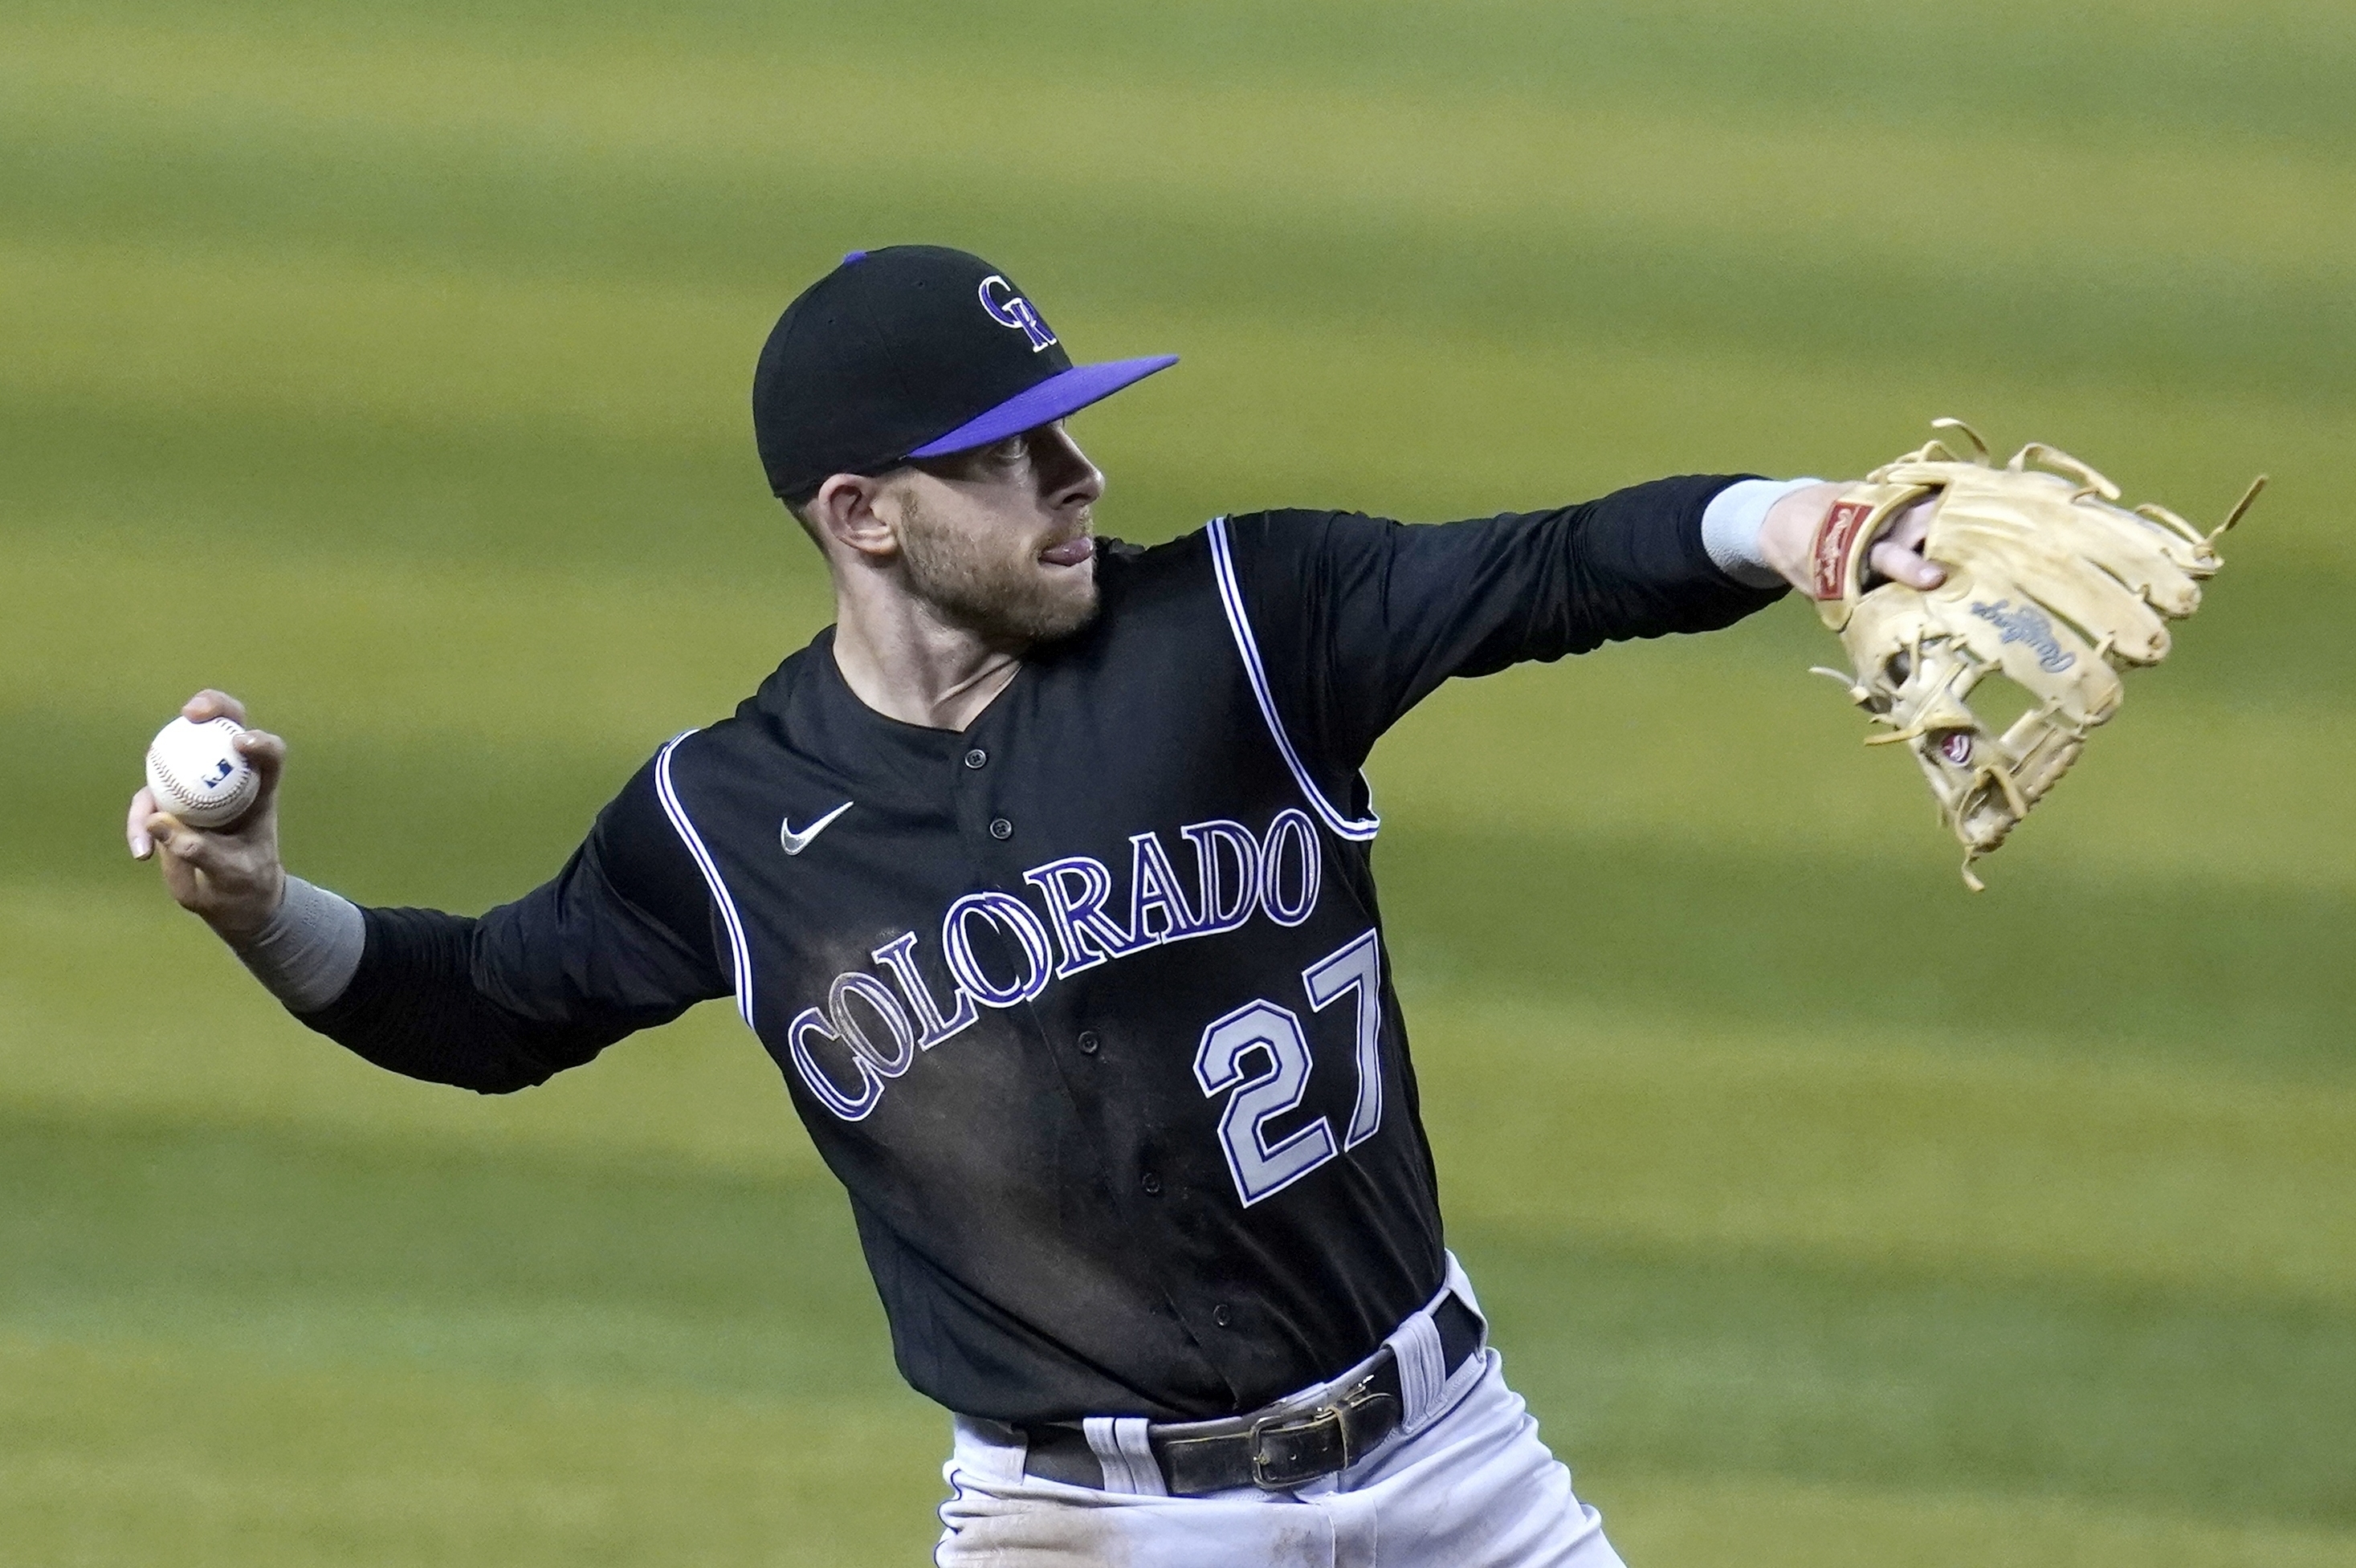 The Yankees aren't a fit for Colorado Rockies shortstop Trevor Story